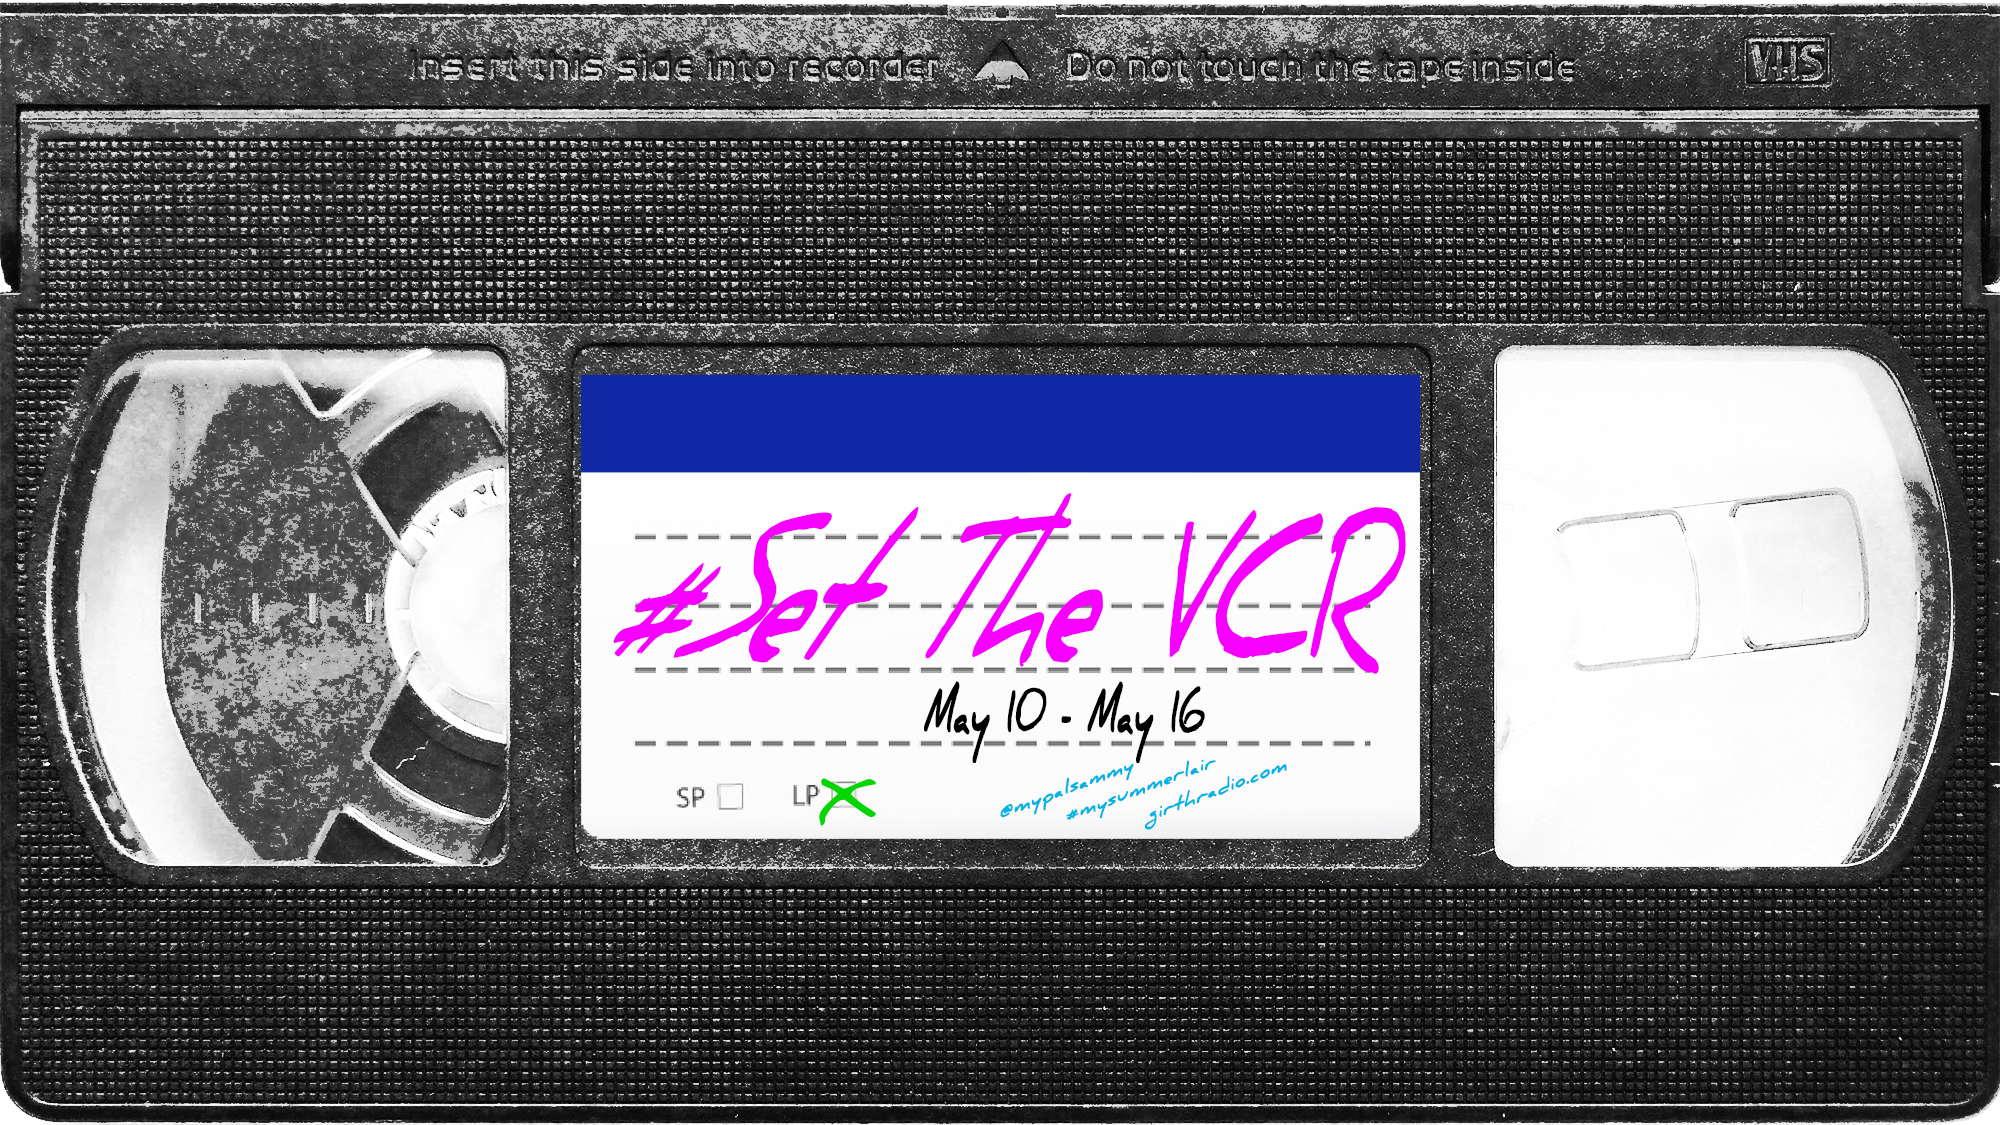 #SetTheVCR: May 10-16, 2020